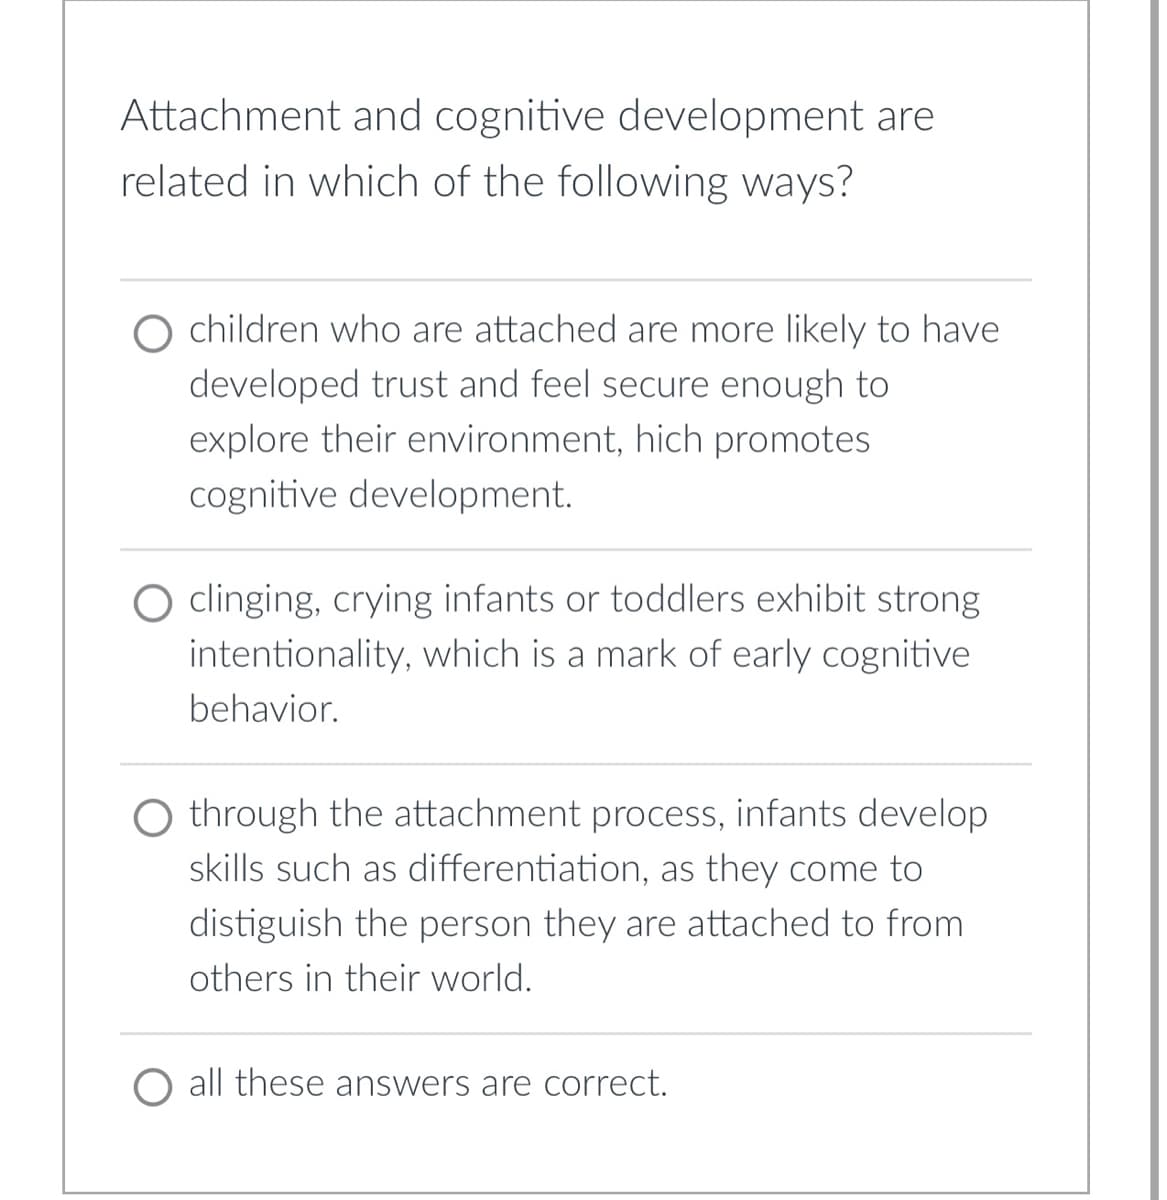 Attachment and cognitive development are
related in which of the following ways?
O children who are attached are more likely to have
developed trust and feel secure enough to
explore their environment, hich promotes
cognitive development.
O clinging, crying infants or toddlers exhibit strong
intentionality, which is a mark of early cognitive
behavior.
O through the attachment process, infants develop
skills such as differentiation, as they come to
distiguish the person they are attached to from
others in their world.
O all these answers are correct.